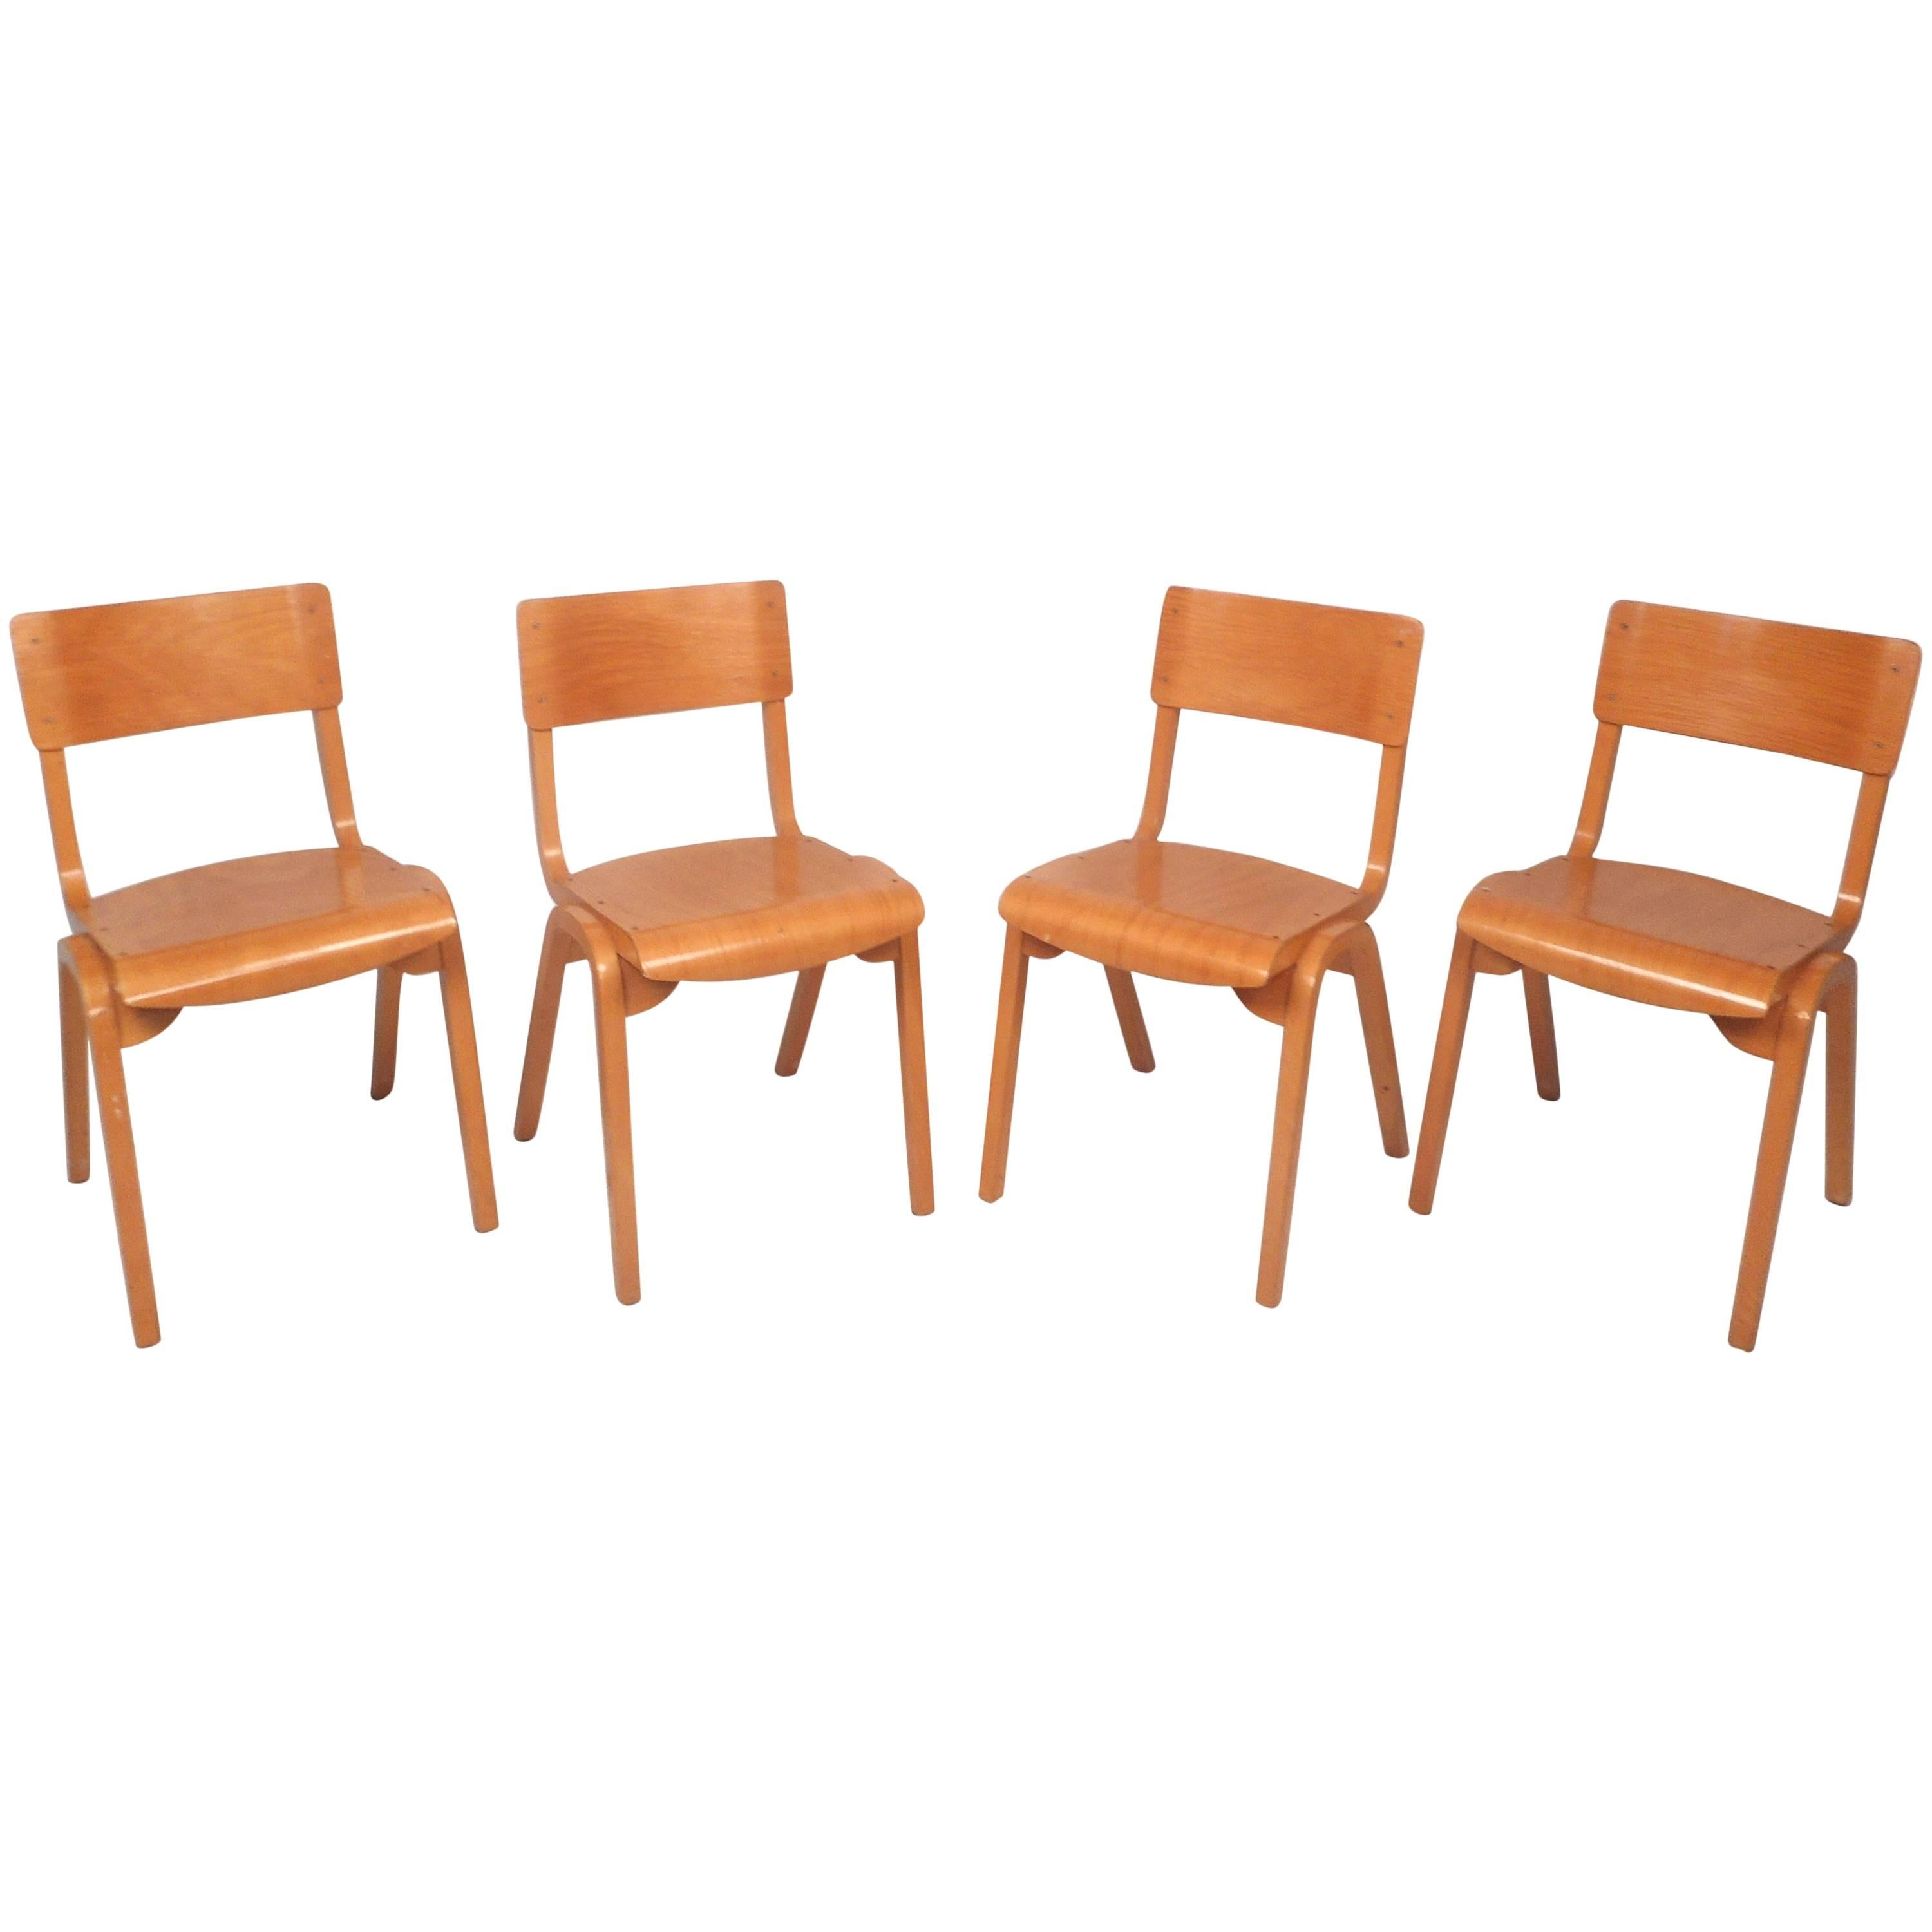 Set of Four Mid-Century Modern Maple Stacking Chairs